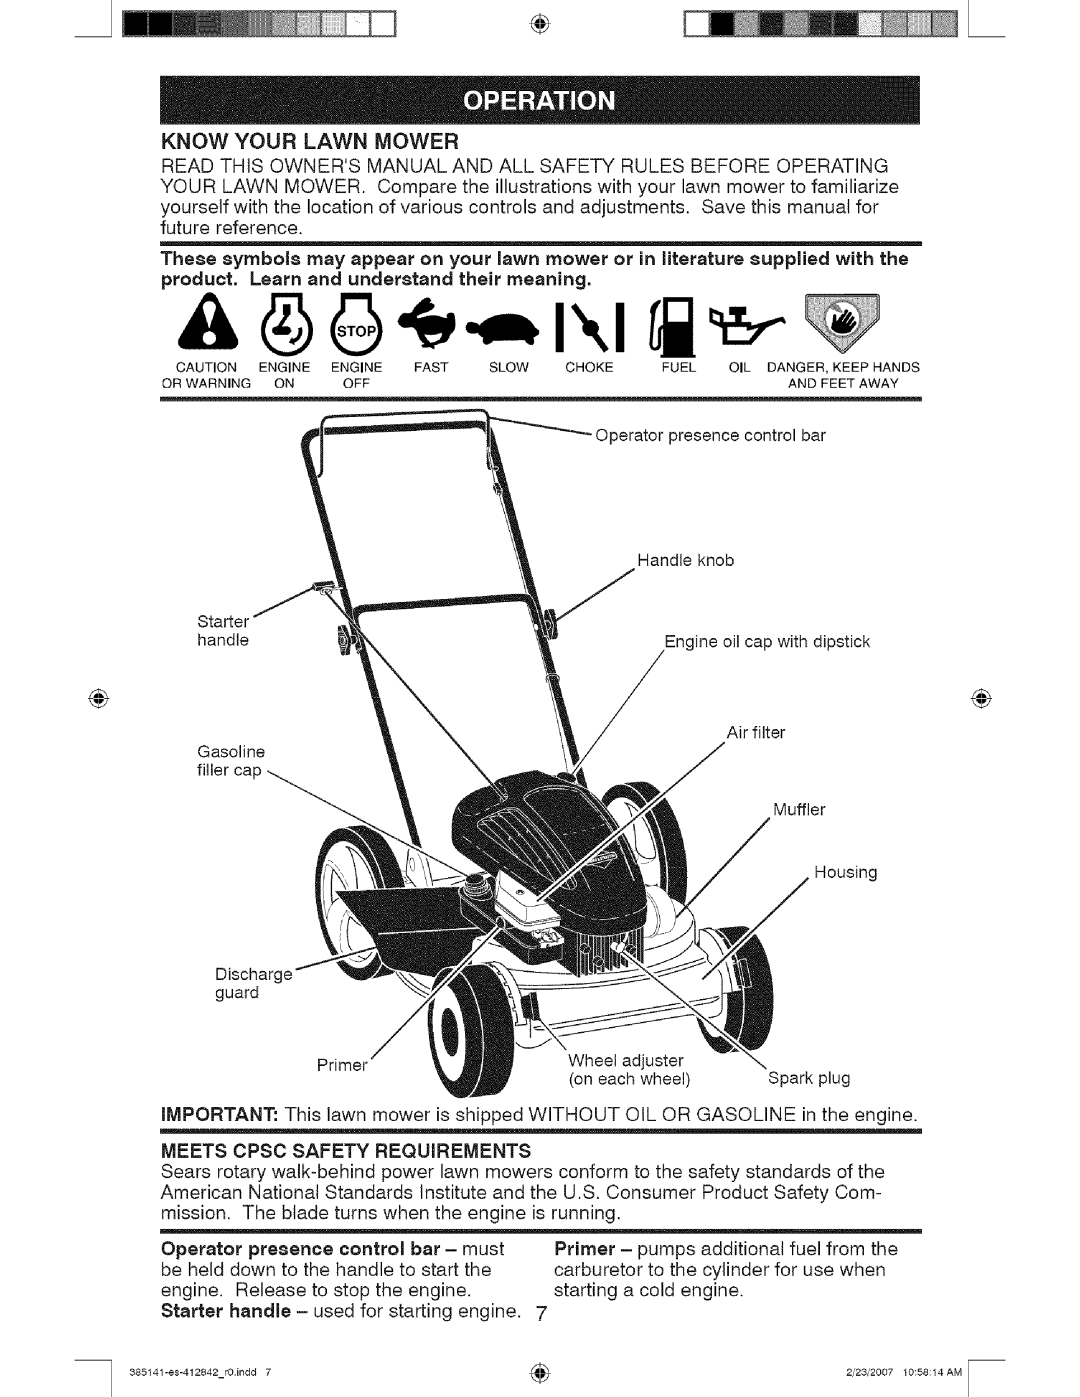 Craftsman 385141, 917 manual Know Your Lawn Mower 